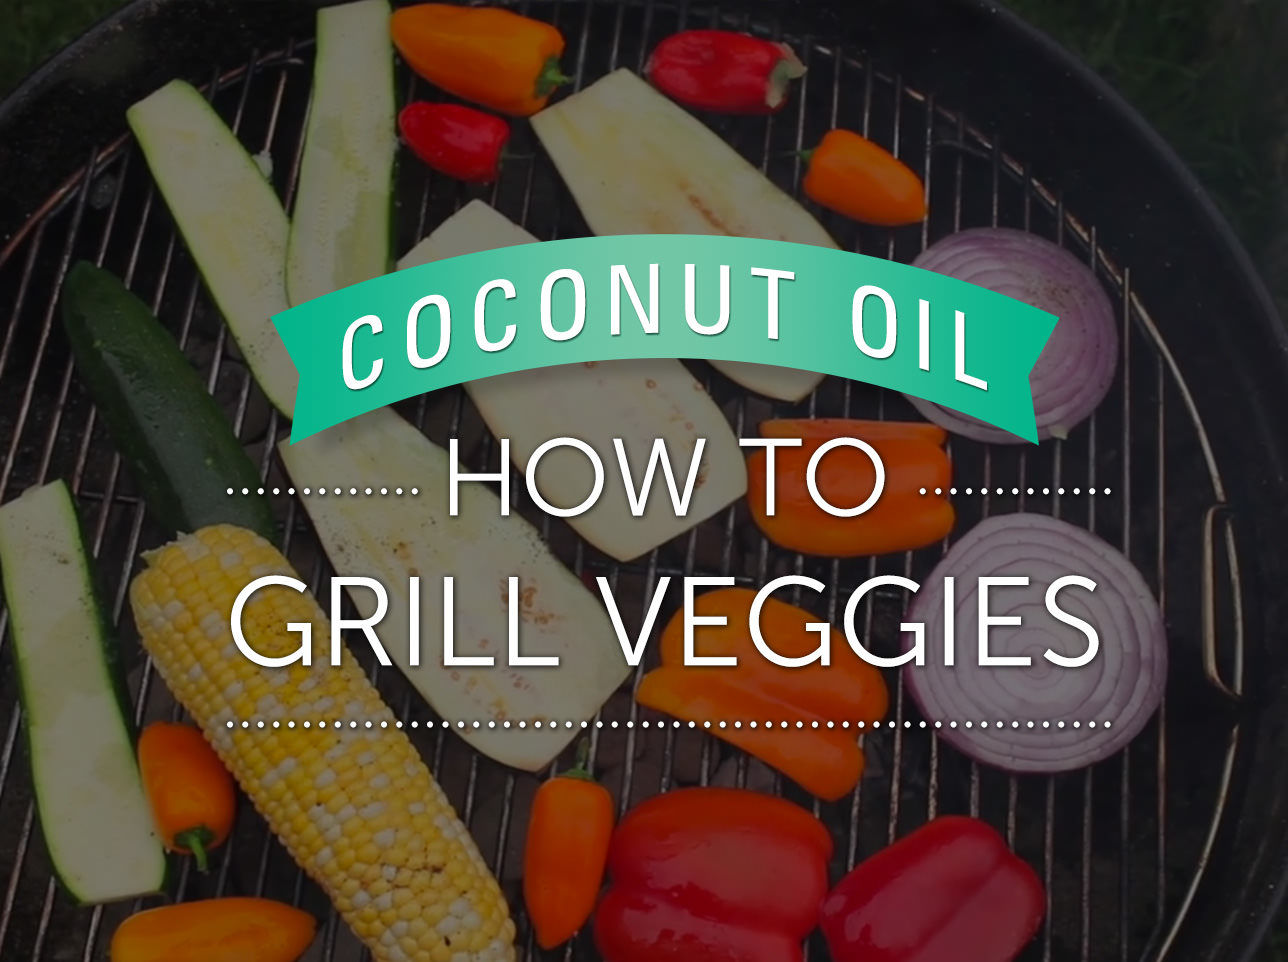 Learn how to grill veggies with LouAna Coconut Oil.